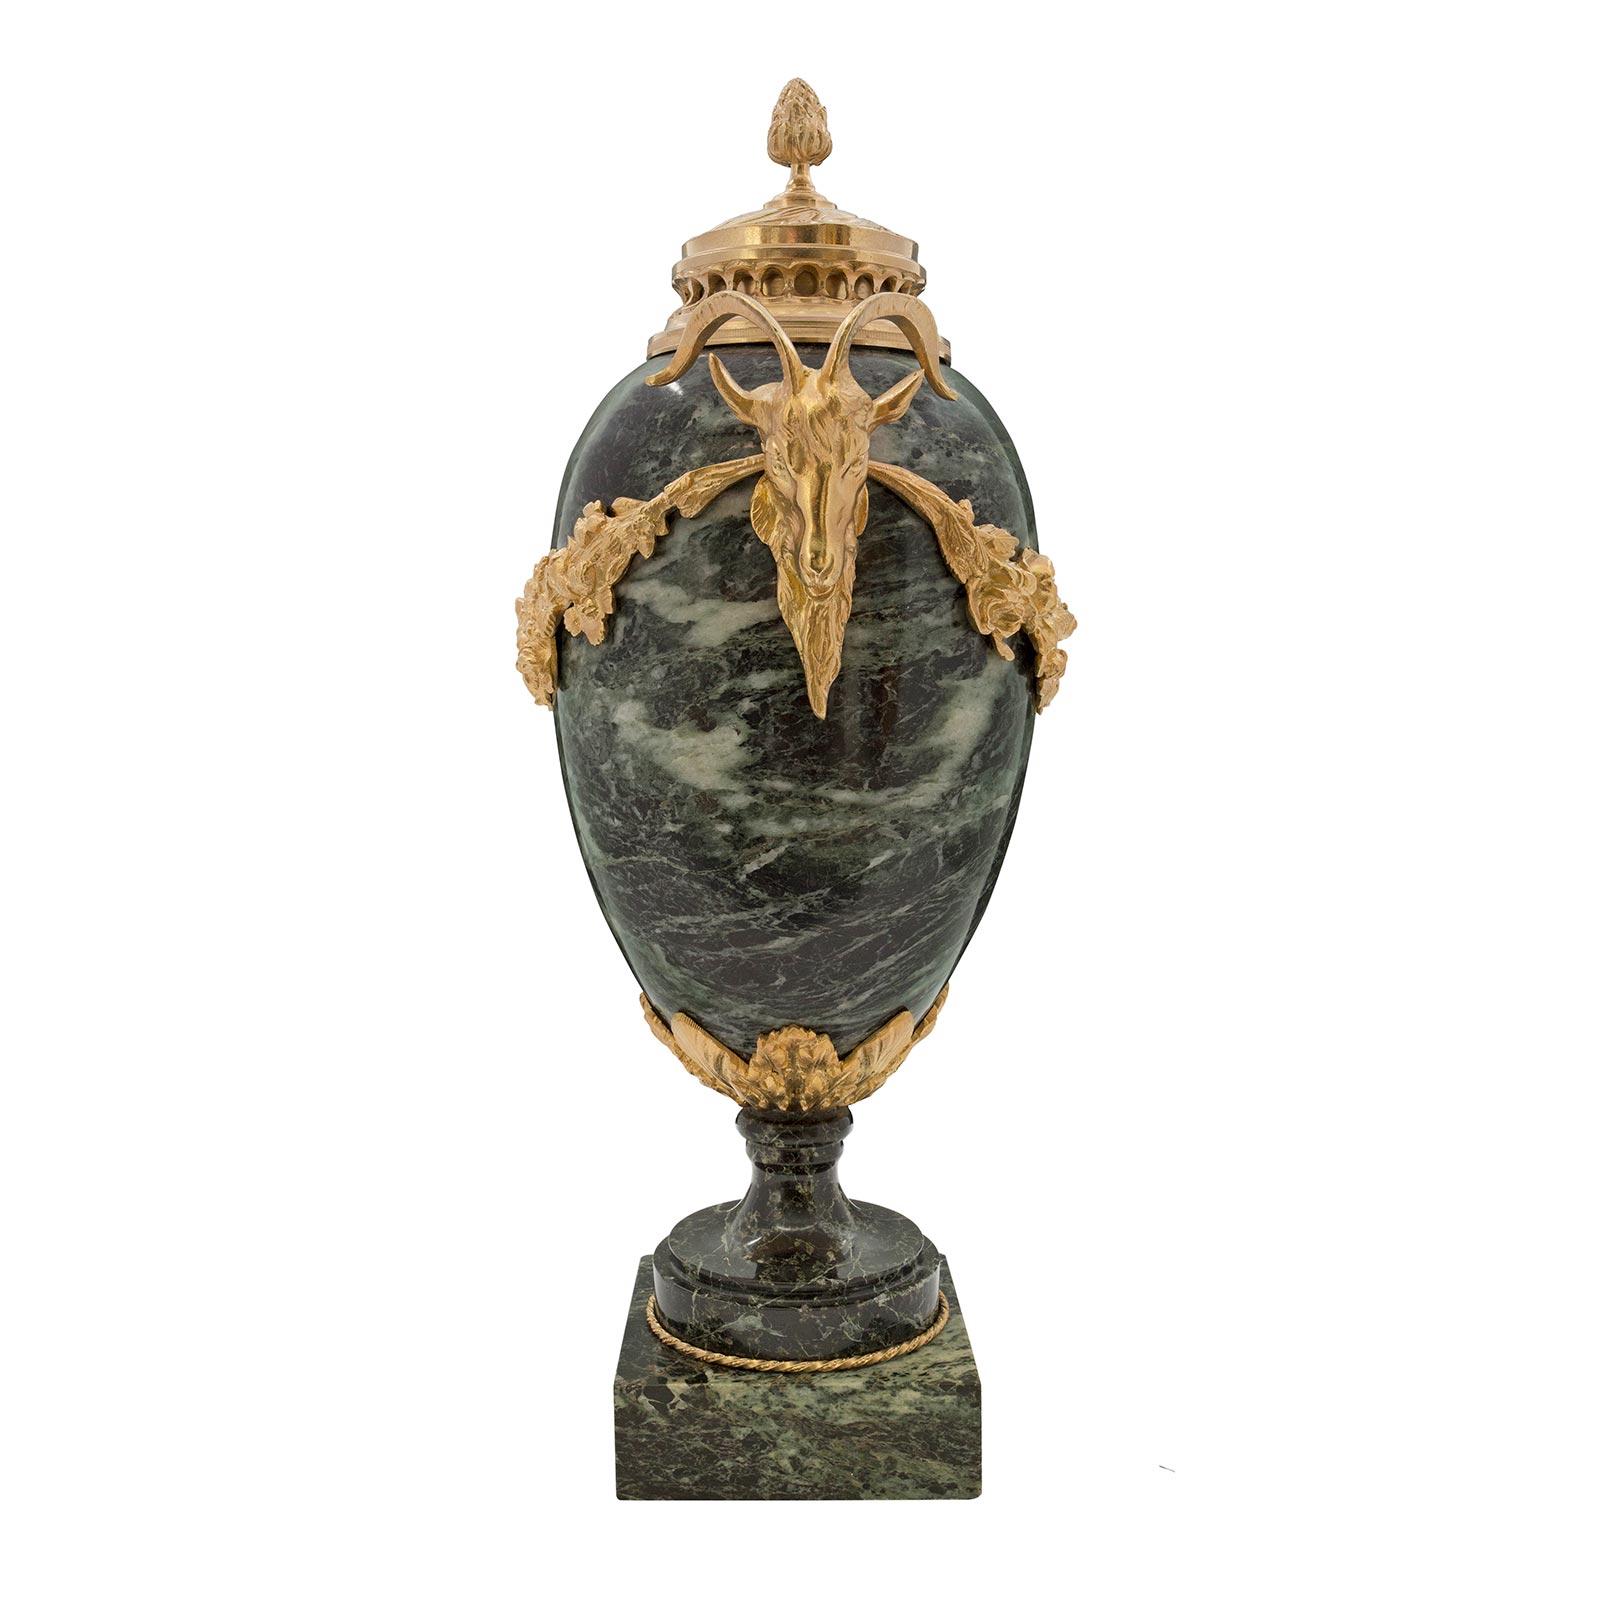 French 19th Century Louis XVI Style Vert De Patricia Marble and Ormolu Urns In Good Condition For Sale In West Palm Beach, FL